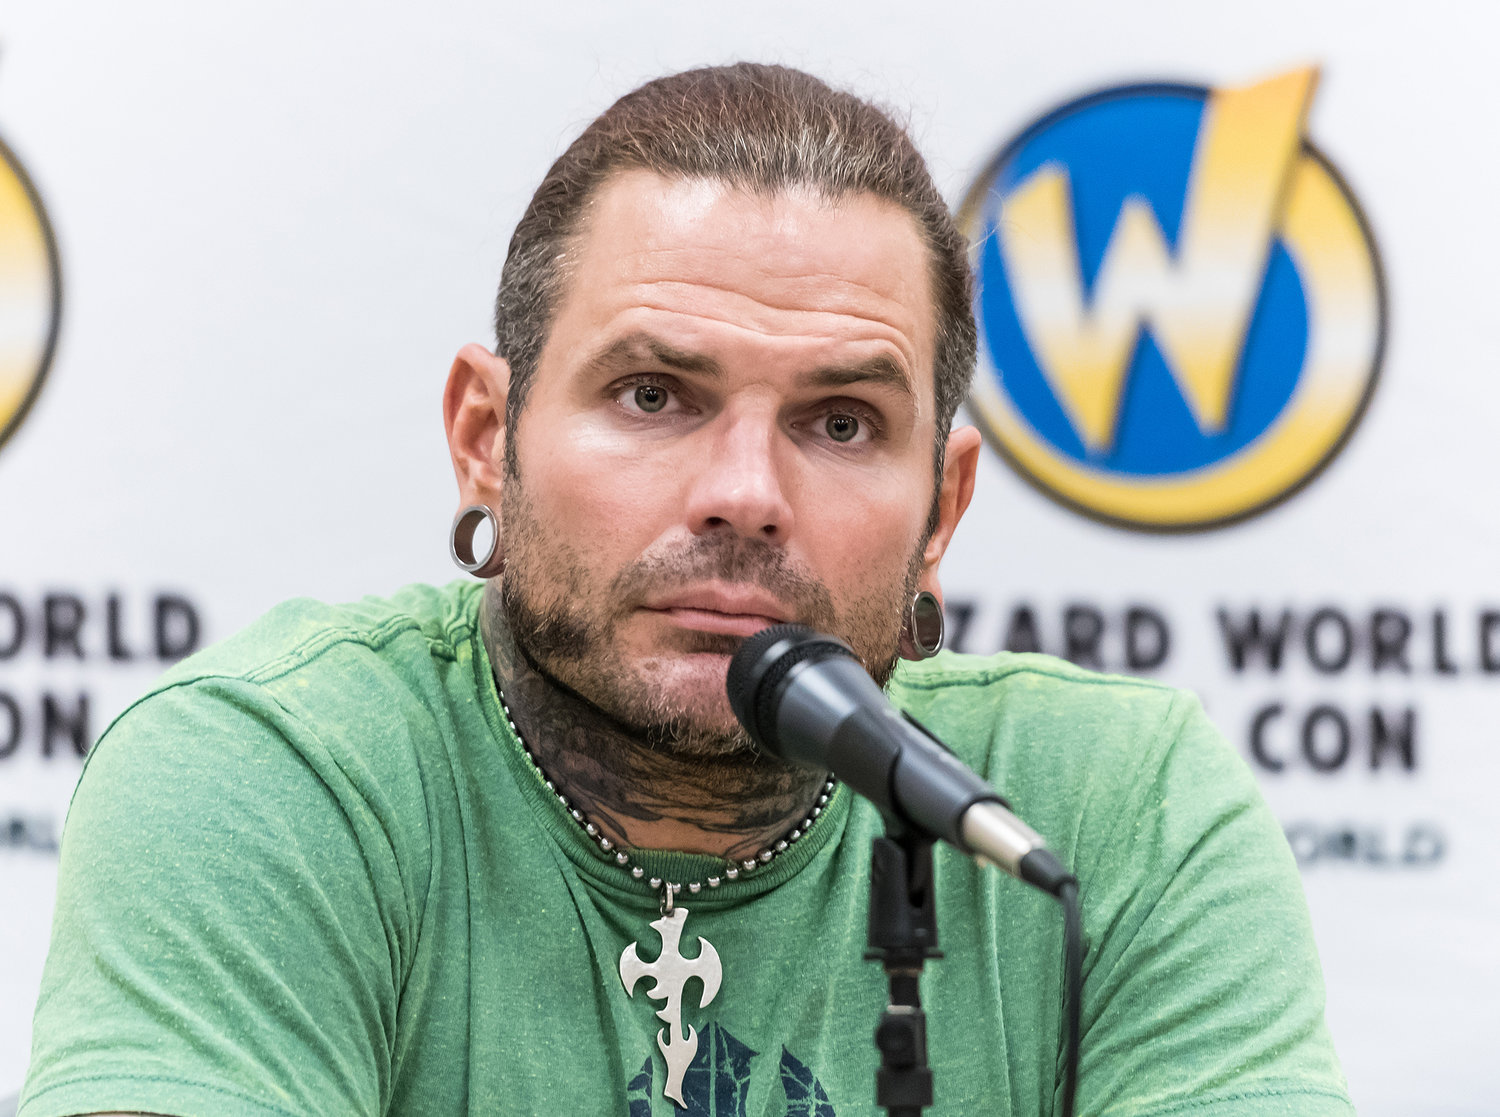 Hardy has been a high-profile wrestling star for years.